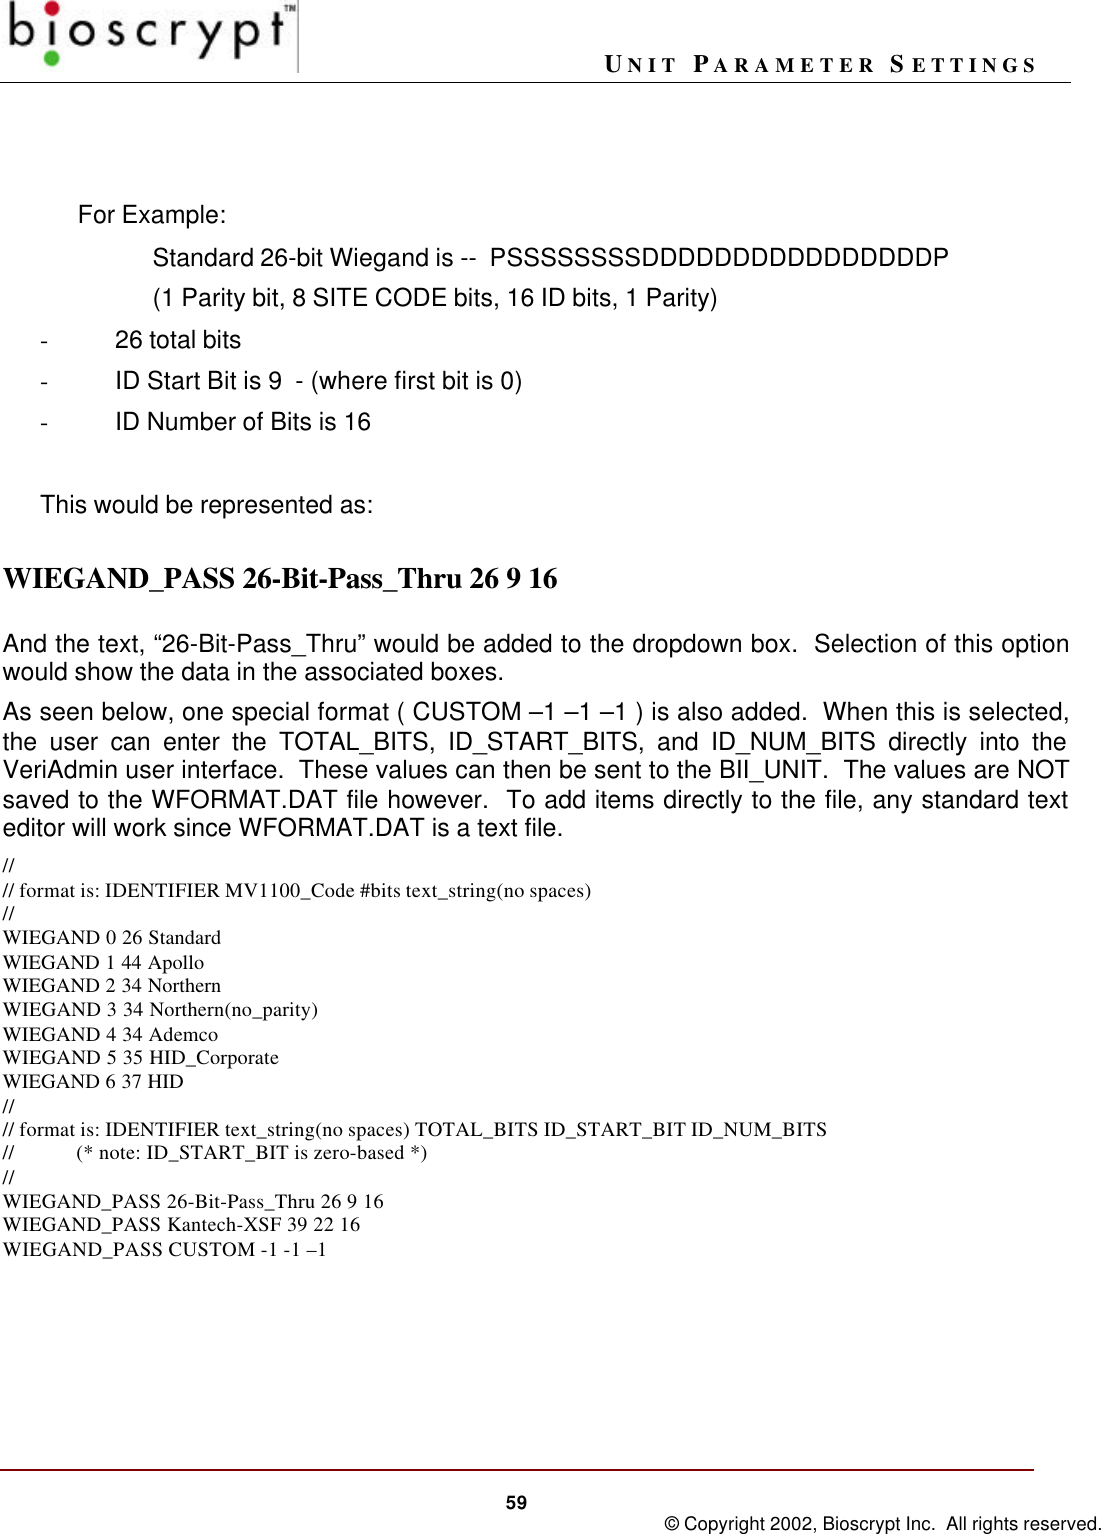 UNIT PARAMETER SETTINGS59 © Copyright 2002, Bioscrypt Inc.  All rights reserved.For Example:Standard 26-bit Wiegand is --  PSSSSSSSSDDDDDDDDDDDDDDDDP(1 Parity bit, 8 SITE CODE bits, 16 ID bits, 1 Parity)- 26 total bits- ID Start Bit is 9  - (where first bit is 0)- ID Number of Bits is 16This would be represented as:WIEGAND_PASS 26-Bit-Pass_Thru 26 9 16And the text, “26-Bit-Pass_Thru” would be added to the dropdown box.  Selection of this optionwould show the data in the associated boxes.As seen below, one special format ( CUSTOM –1 –1 –1 ) is also added.  When this is selected,the user can enter the TOTAL_BITS, ID_START_BITS, and ID_NUM_BITS directly into theVeriAdmin user interface.  These values can then be sent to the BII_UNIT.  The values are NOTsaved to the WFORMAT.DAT file however.  To add items directly to the file, any standard texteditor will work since WFORMAT.DAT is a text file.//// format is: IDENTIFIER MV1100_Code #bits text_string(no spaces)//WIEGAND 0 26 StandardWIEGAND 1 44 ApolloWIEGAND 2 34 NorthernWIEGAND 3 34 Northern(no_parity)WIEGAND 4 34 AdemcoWIEGAND 5 35 HID_CorporateWIEGAND 6 37 HID//// format is: IDENTIFIER text_string(no spaces) TOTAL_BITS ID_START_BIT ID_NUM_BITS//            (* note: ID_START_BIT is zero-based *)//WIEGAND_PASS 26-Bit-Pass_Thru 26 9 16WIEGAND_PASS Kantech-XSF 39 22 16WIEGAND_PASS CUSTOM -1 -1 –1